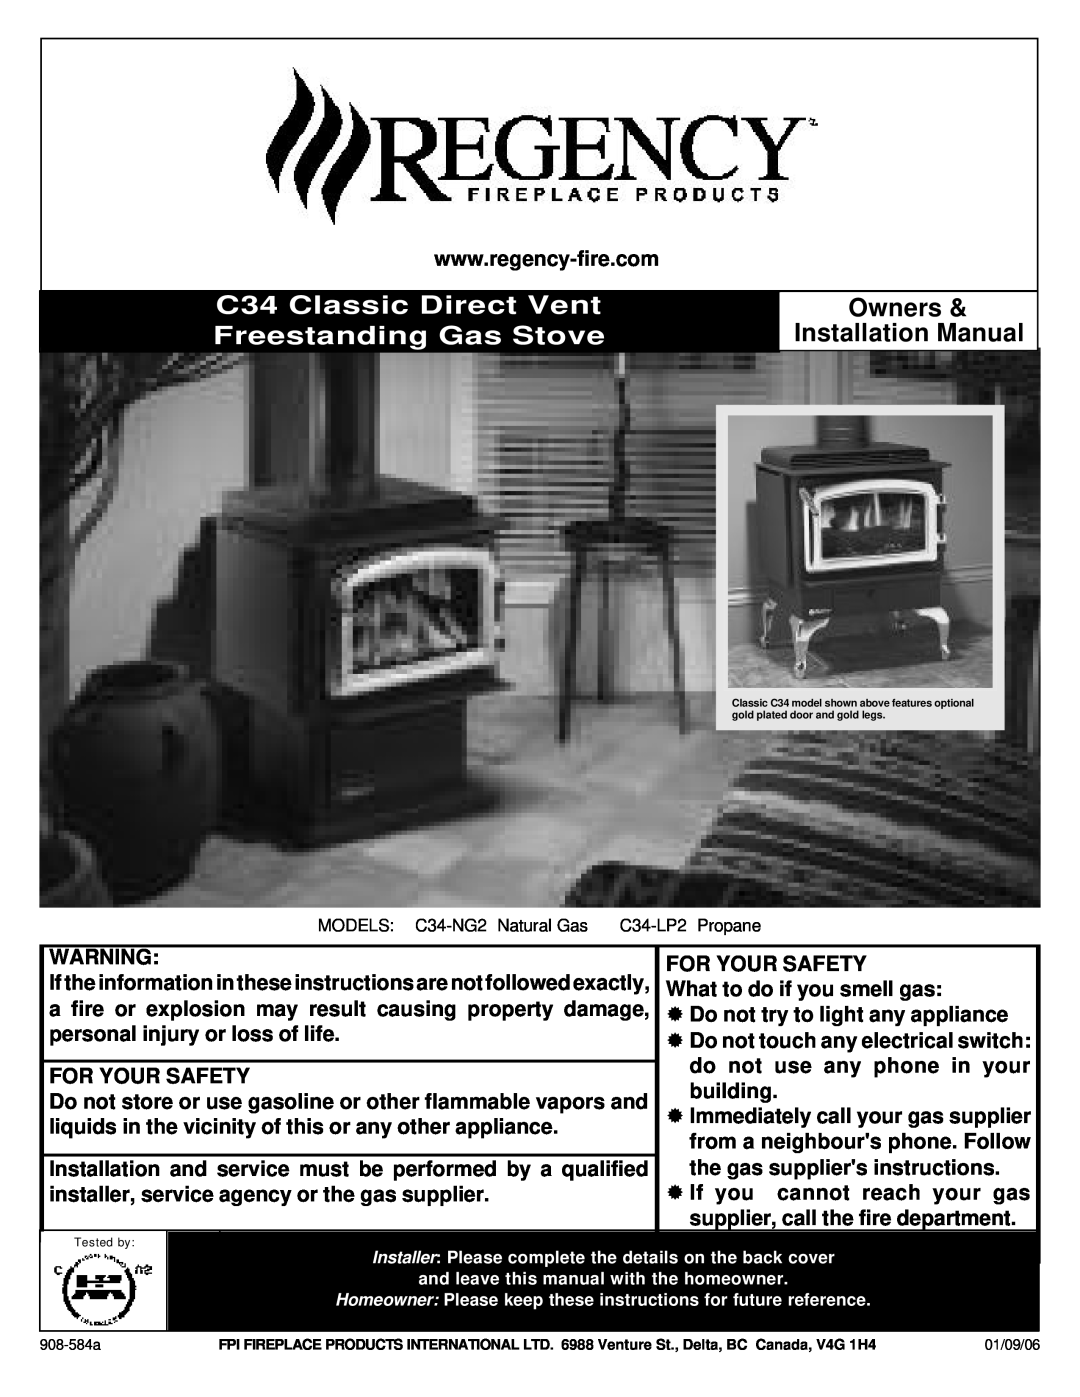 Regency C34-LP2, C34-NG2 installation manual C34 Classic Direct Vent Freestanding Gas Stove, Owners & Installation Manual 